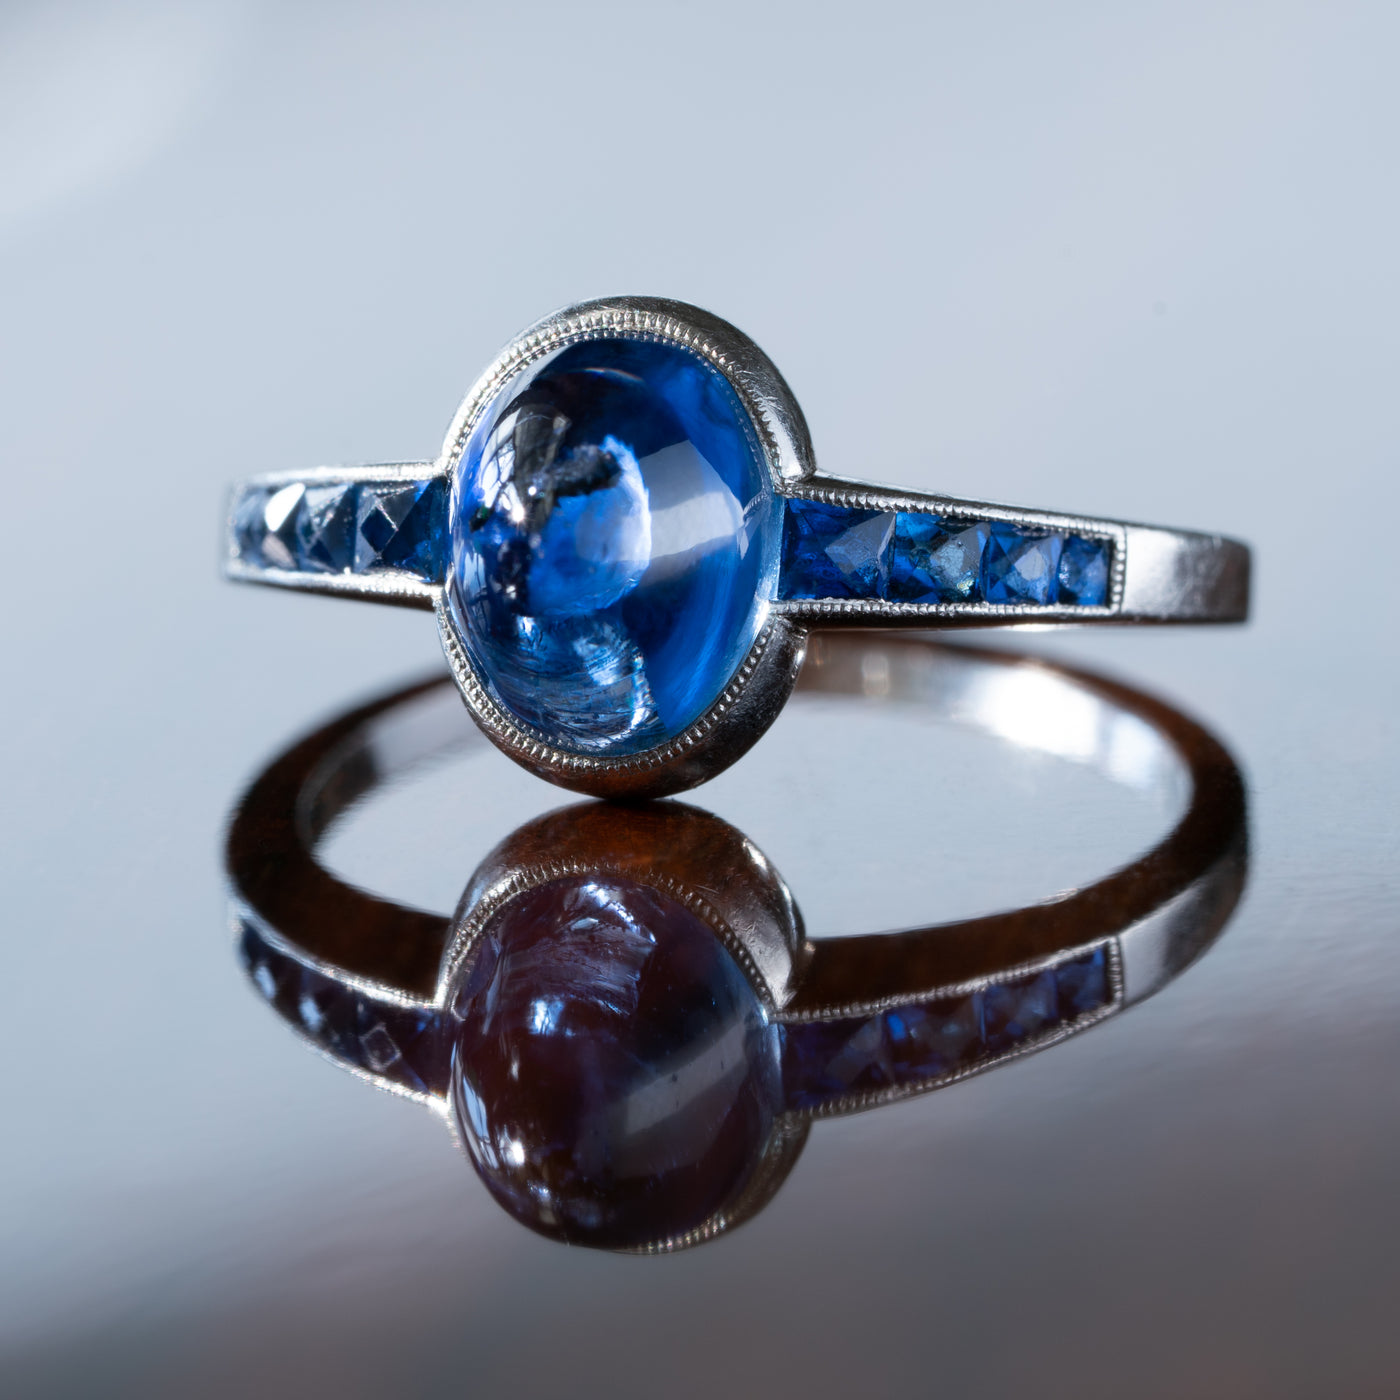 ART DECO FRENCH PLATINUM AND 1.30CT. CABOCHON SUGARLOAF SAPPHIRE RING c.1920s